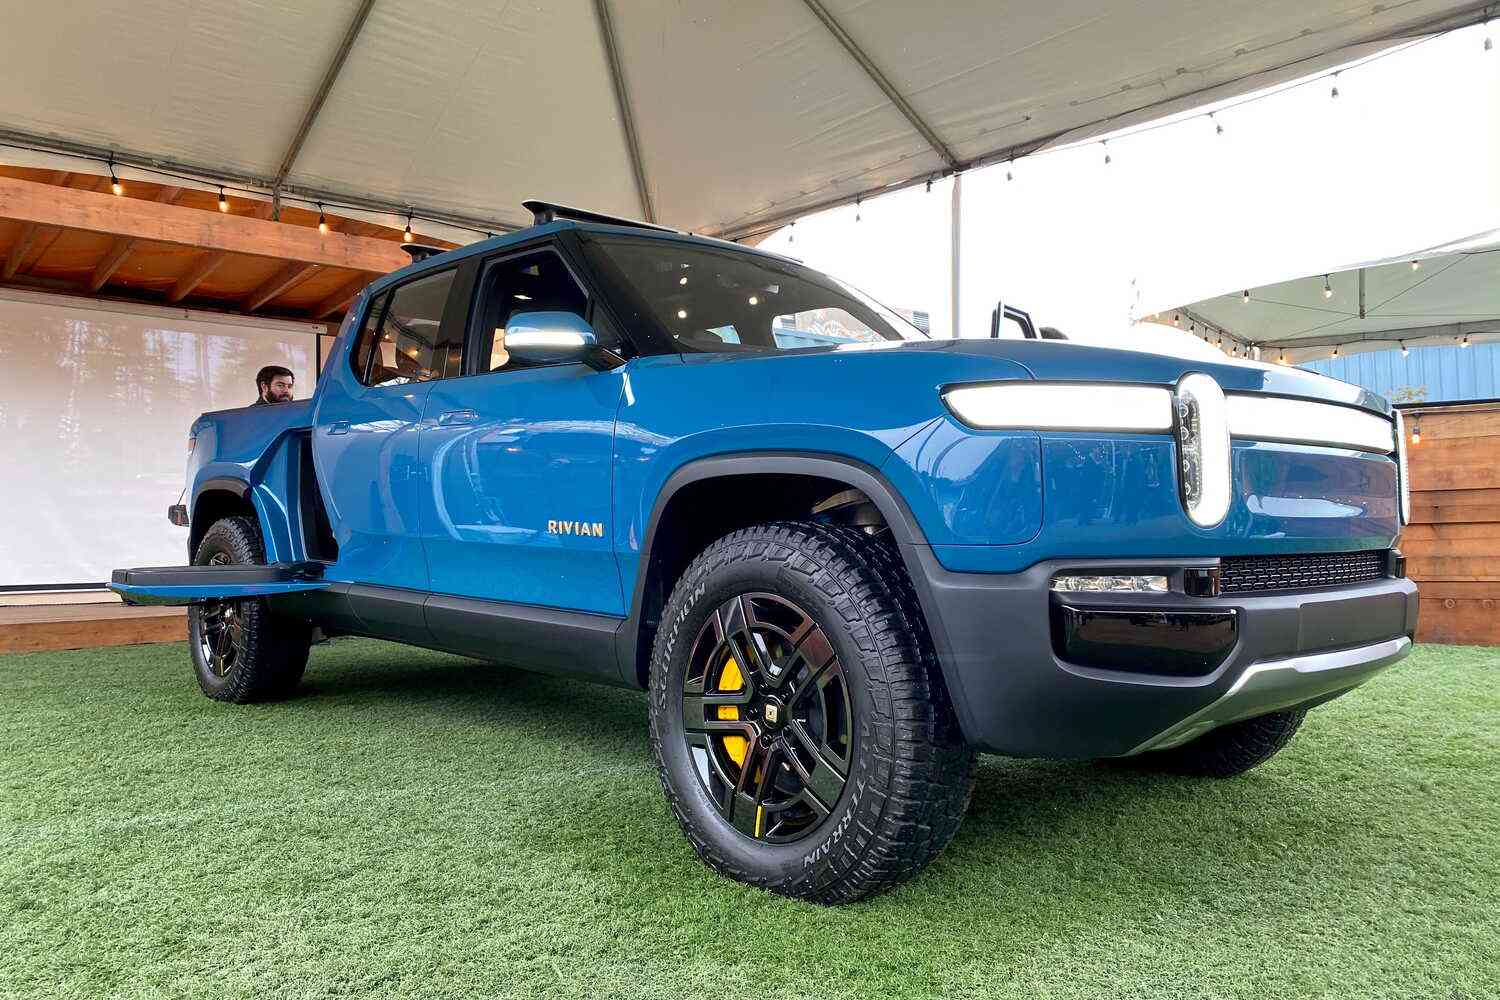 Now THAT'S a car IPO! Rivian IPO is priced at $21.50